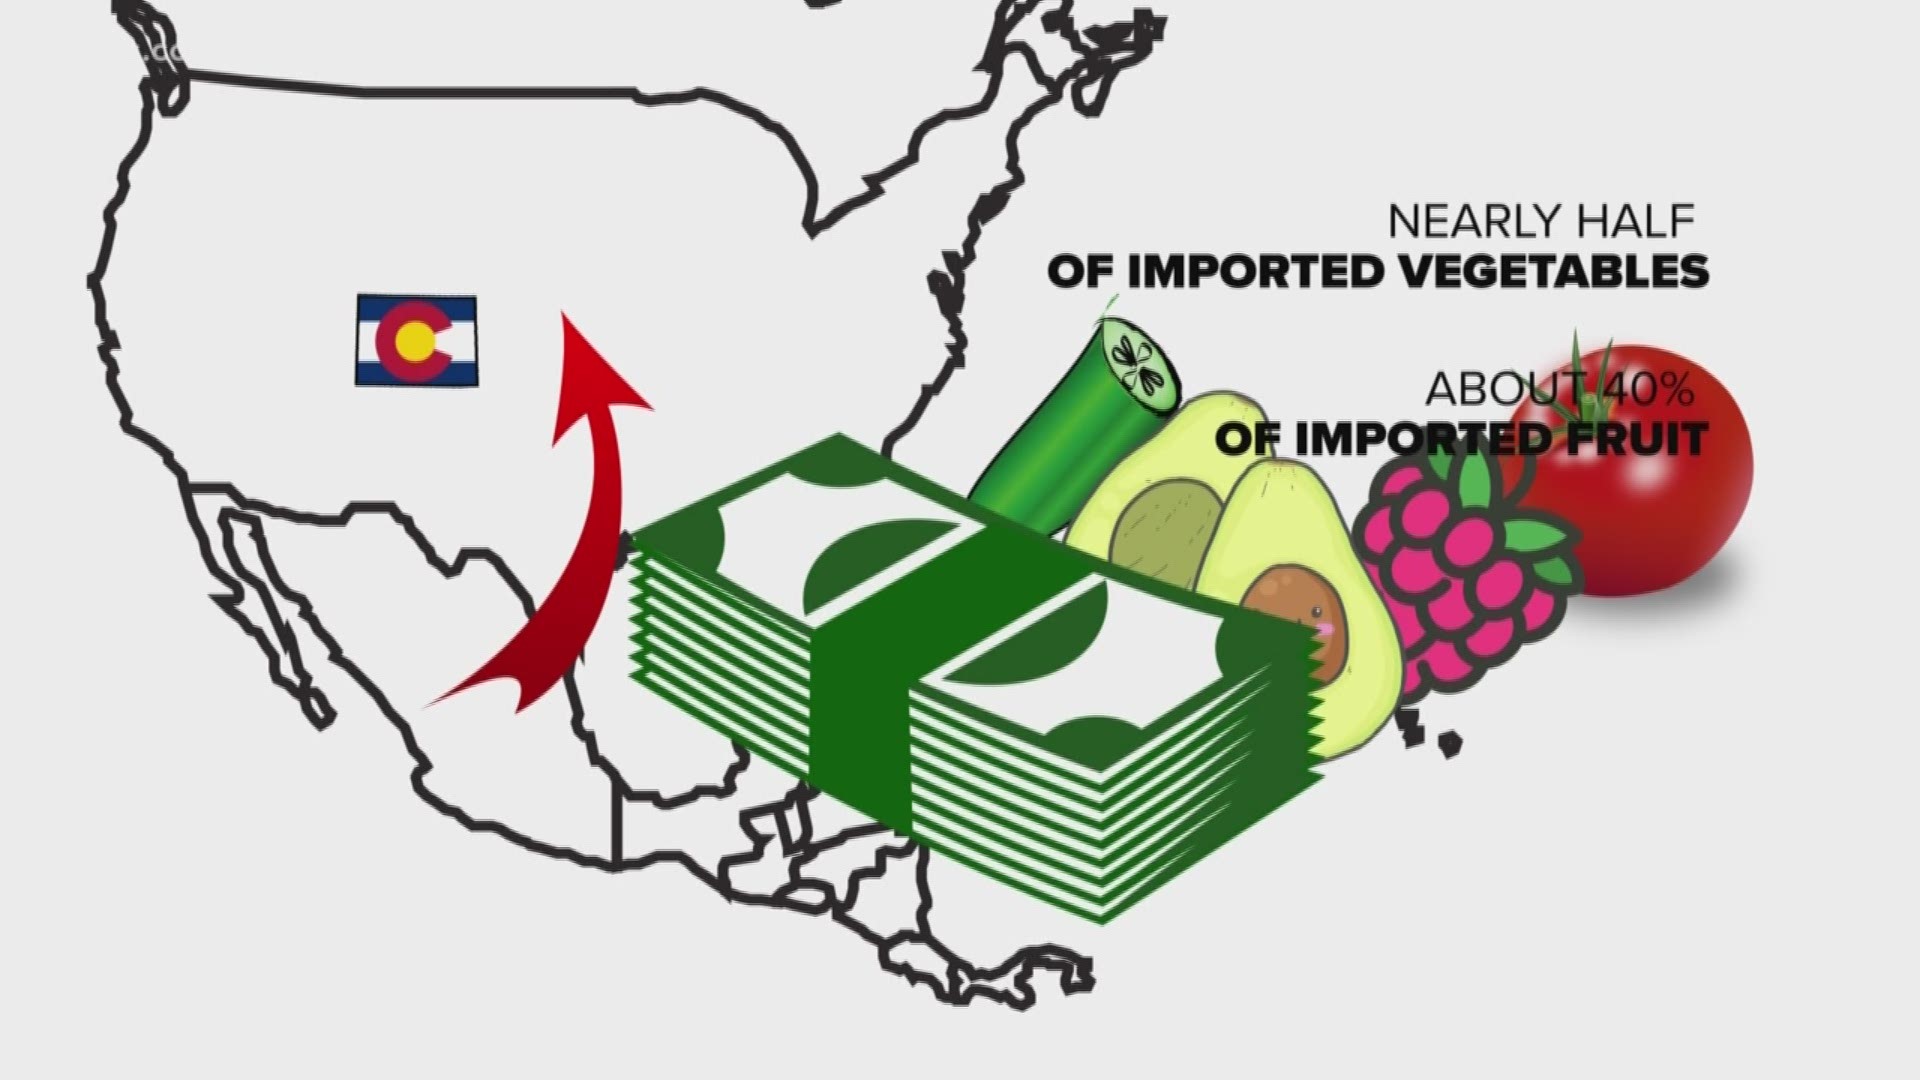 Mexico is Colorado's third largest source of imports - accounting for 12% of the stuff we buy - behind only Canada and China.